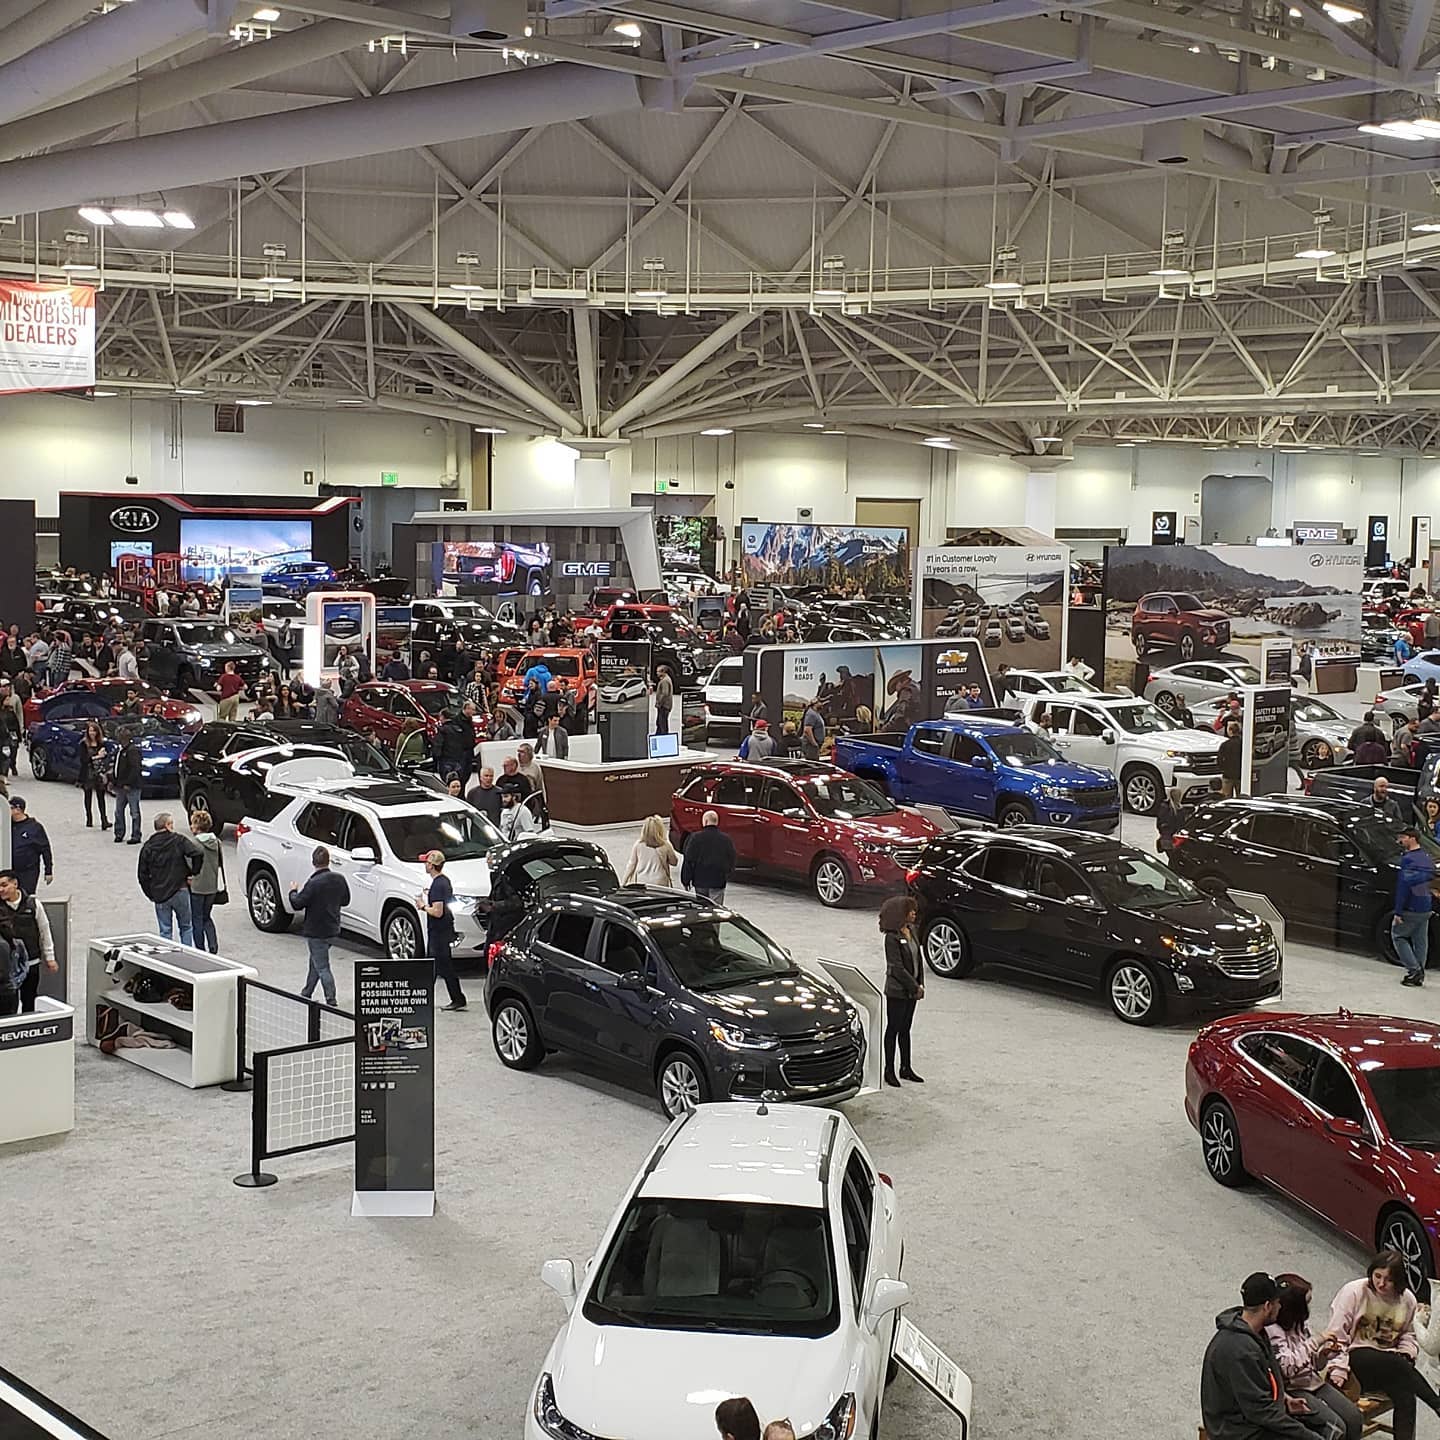 Twin Cities Auto Show 2023 Everything You Need to Know! Thrifty